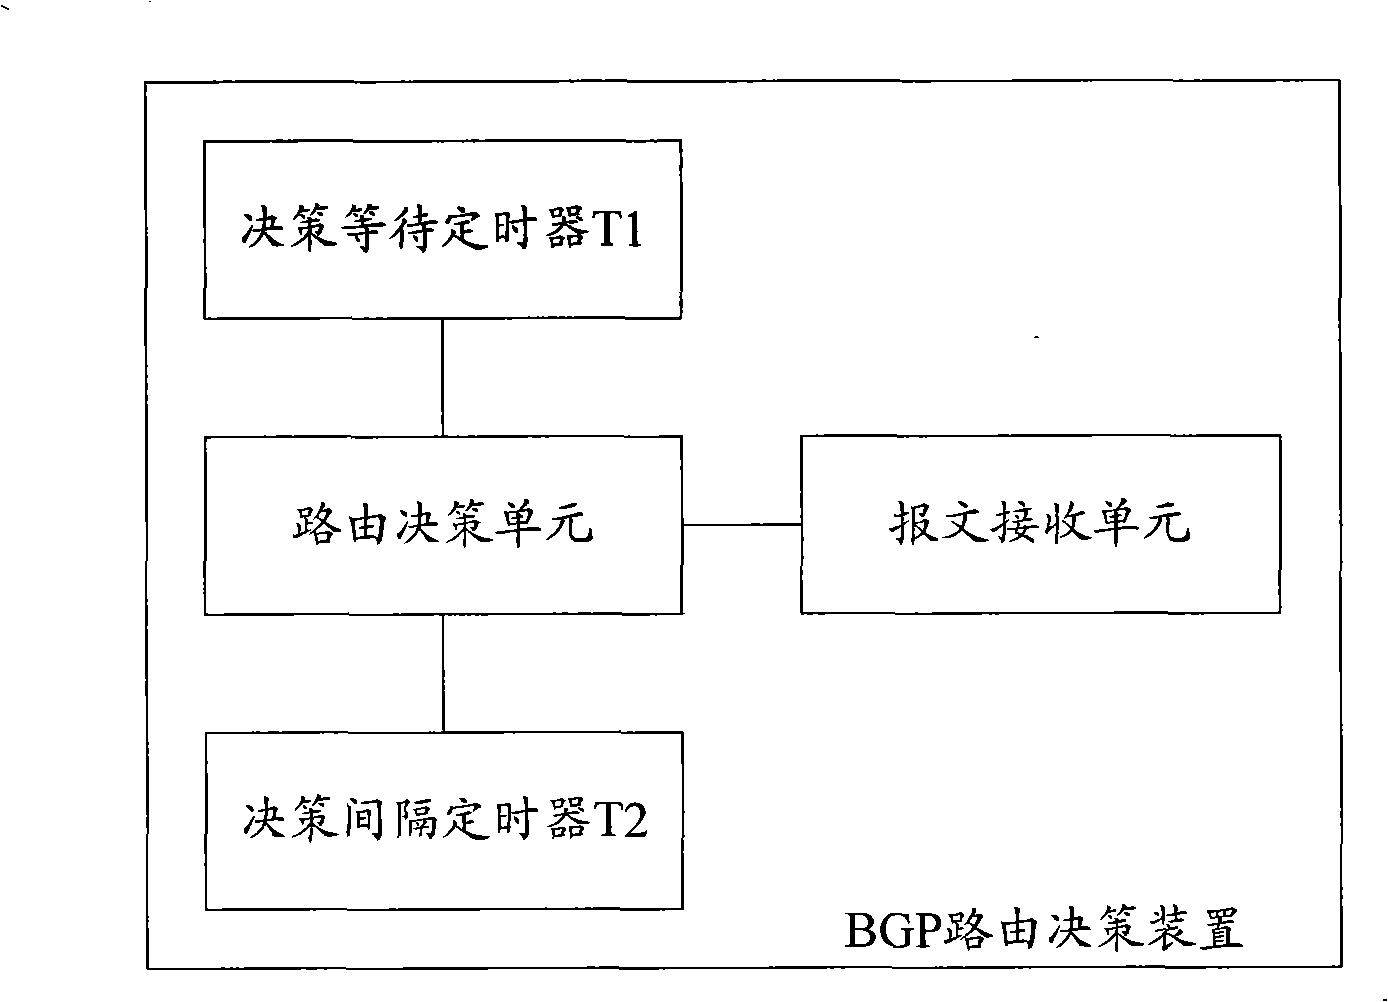 Method and apparatus for deciding BGP route